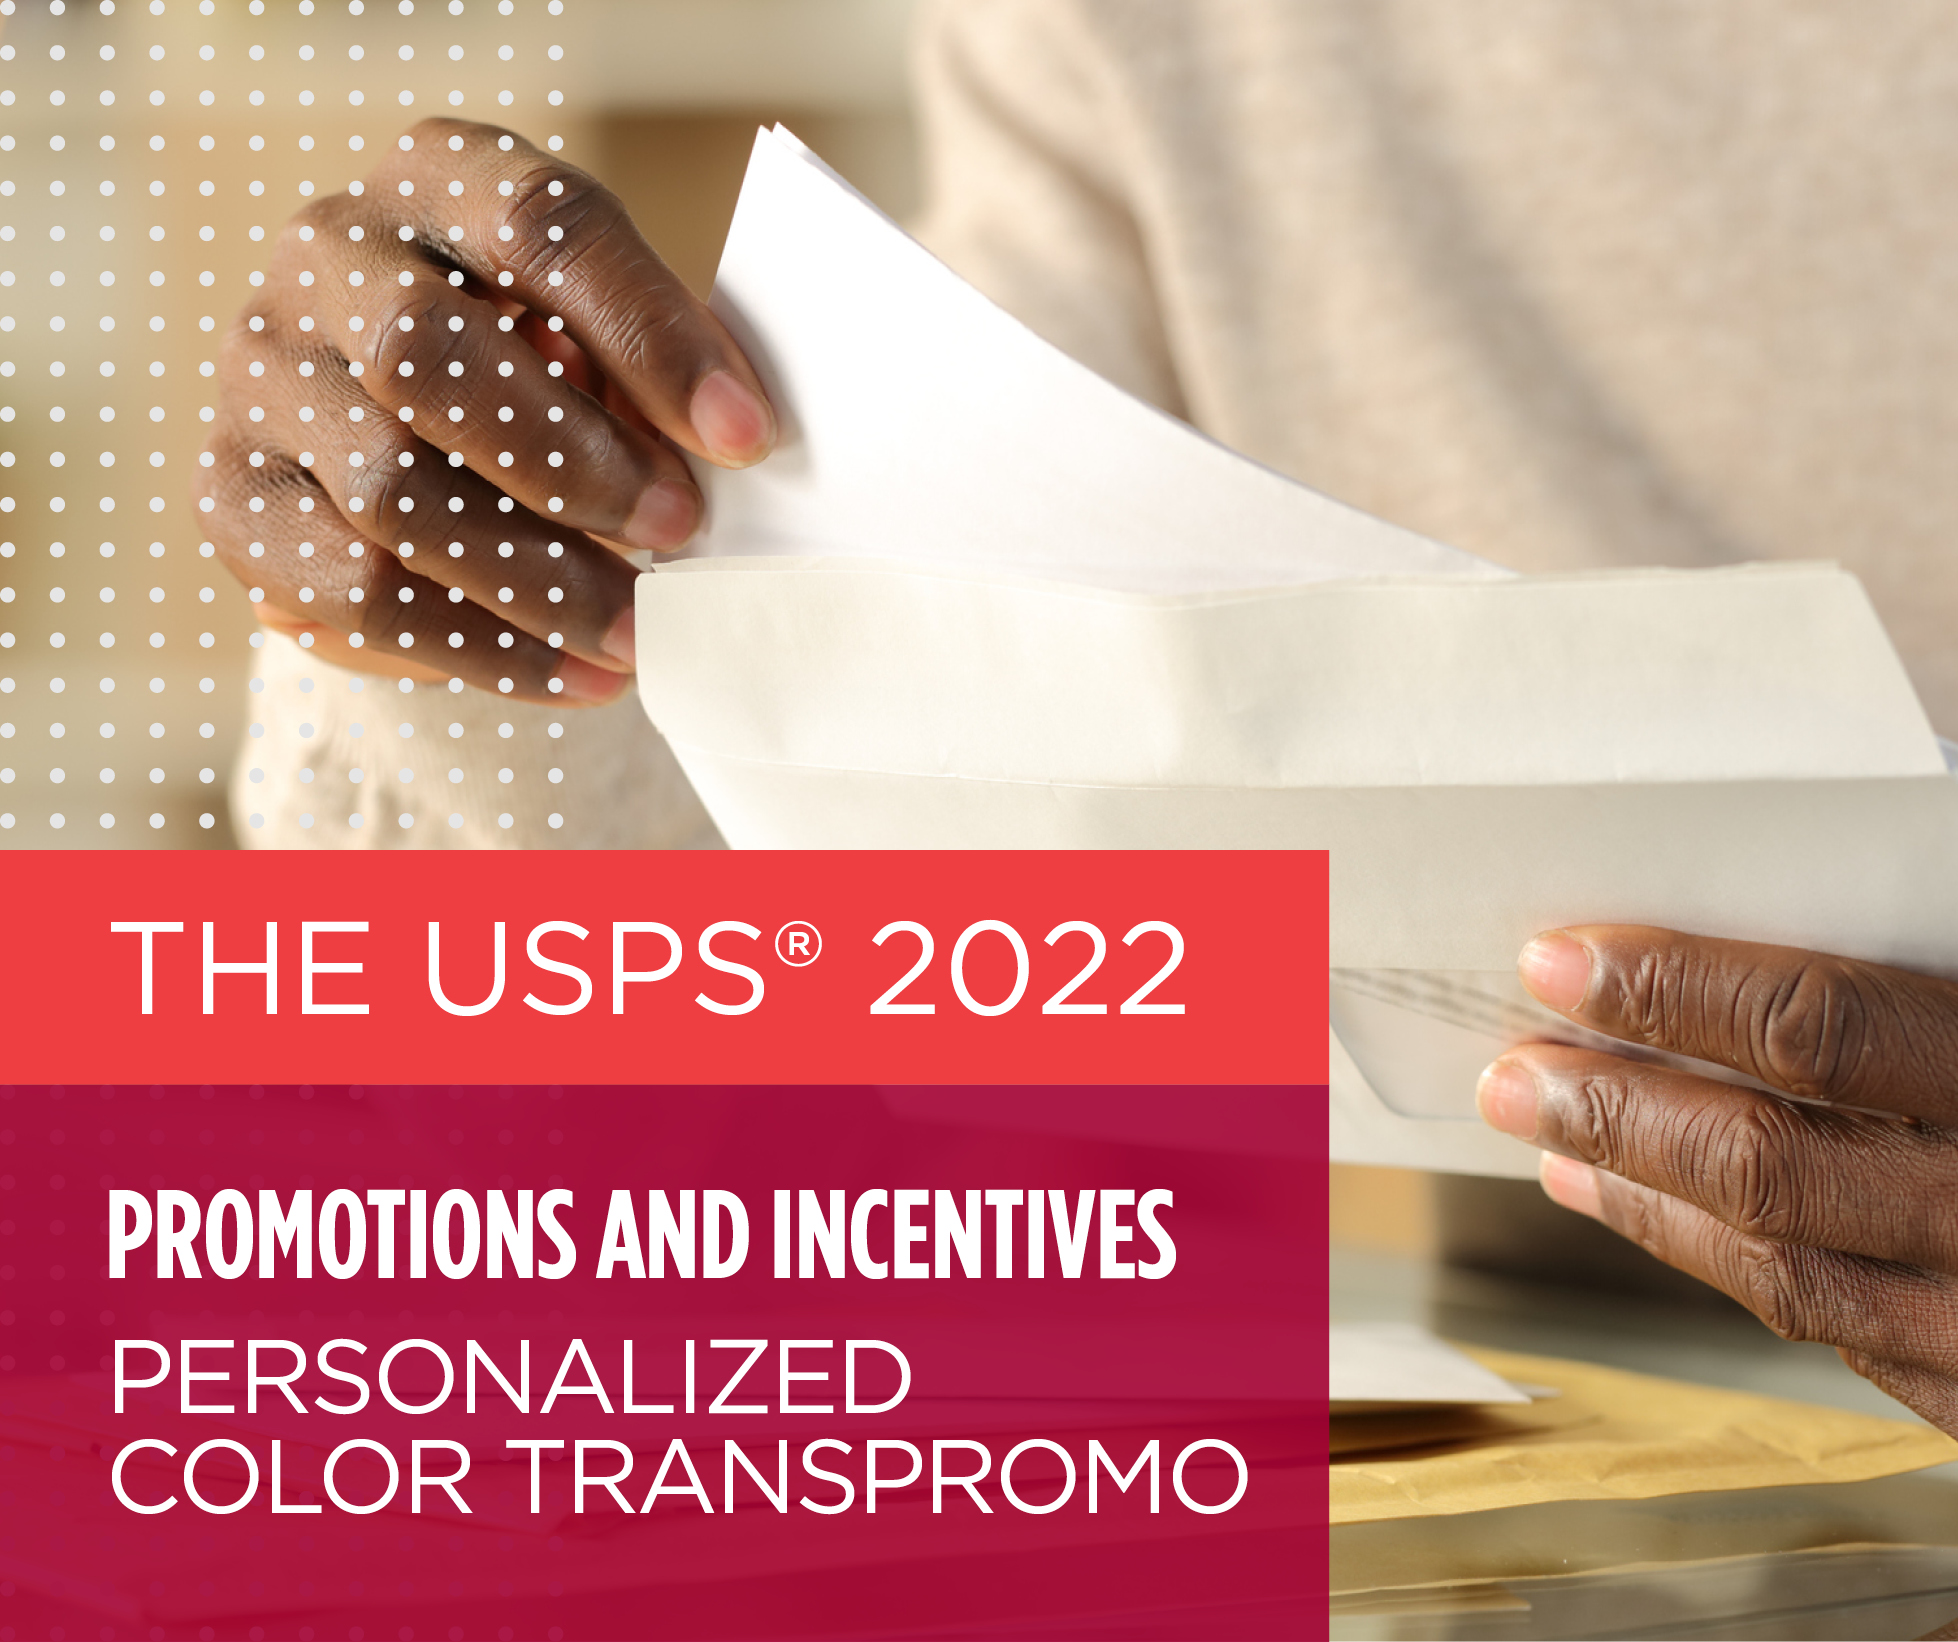 Don’t miss out: USPS 2022 Personalized Color Transpromo Promotion